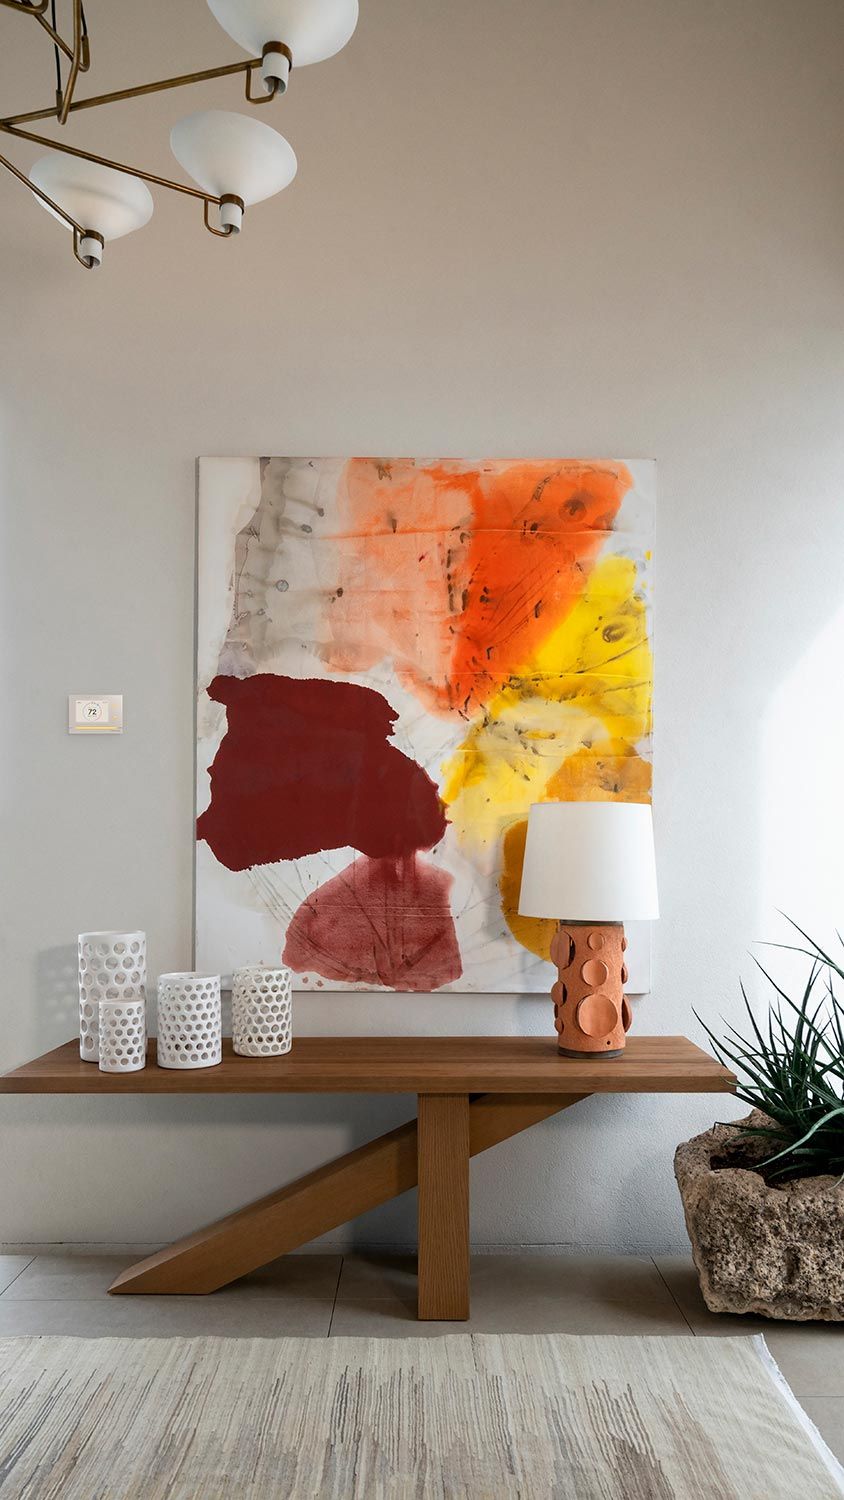 Crestron Home in a wall with a warm color abstract art piece